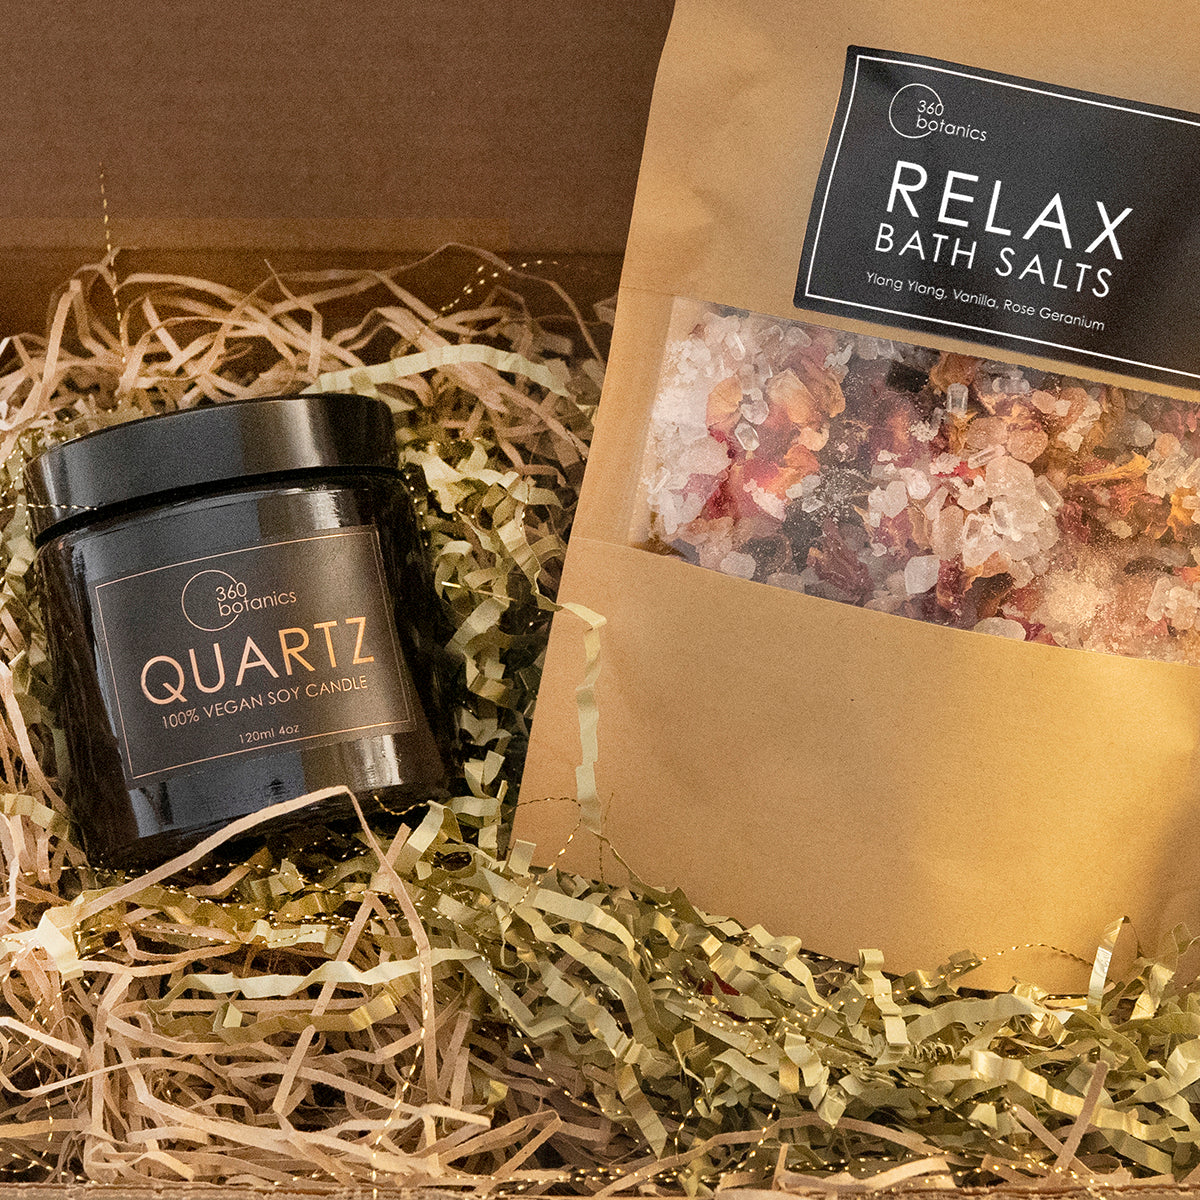 A cosy and inviting gift set from 360 Botanics, presented in a brown cardboard box filled with natural shredded paper. Inside, there's a sleek black glass jar labeled 'QUARTZ 100% VEGAN SOY CANDLE' and a kraft paper pouch of 'RELAX BATH SALTS' with visible crystals of Ylang Ylang, Vanilla, and Rose Geranium, promising a soothing and aromatic experience